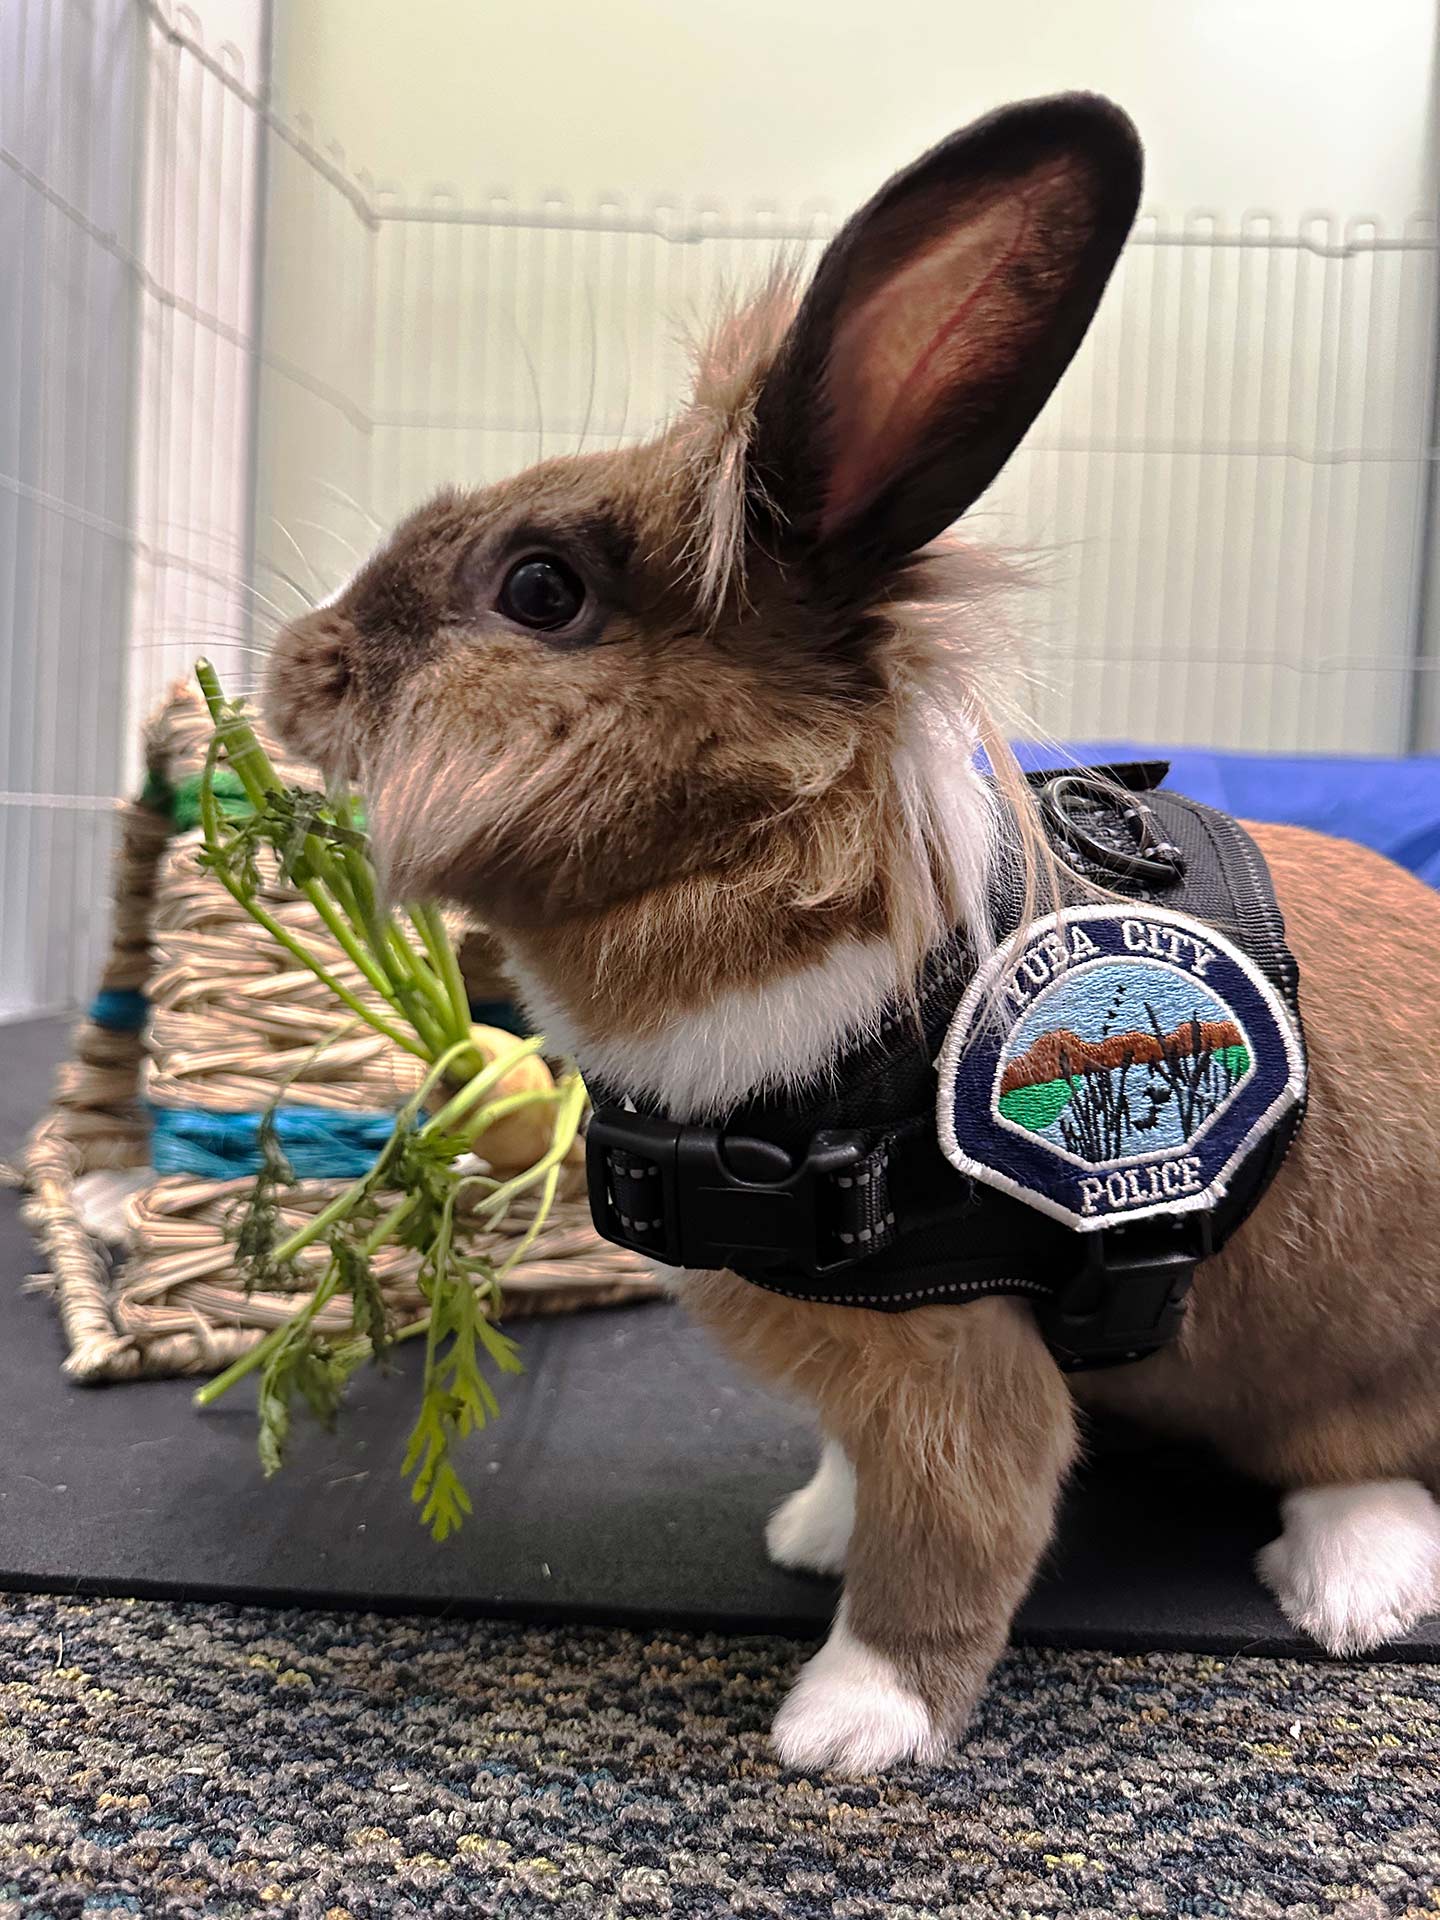 officer-percy-the-support-rabbit-in-uniform-in-his-office-yuba-city-police-department-ycpd